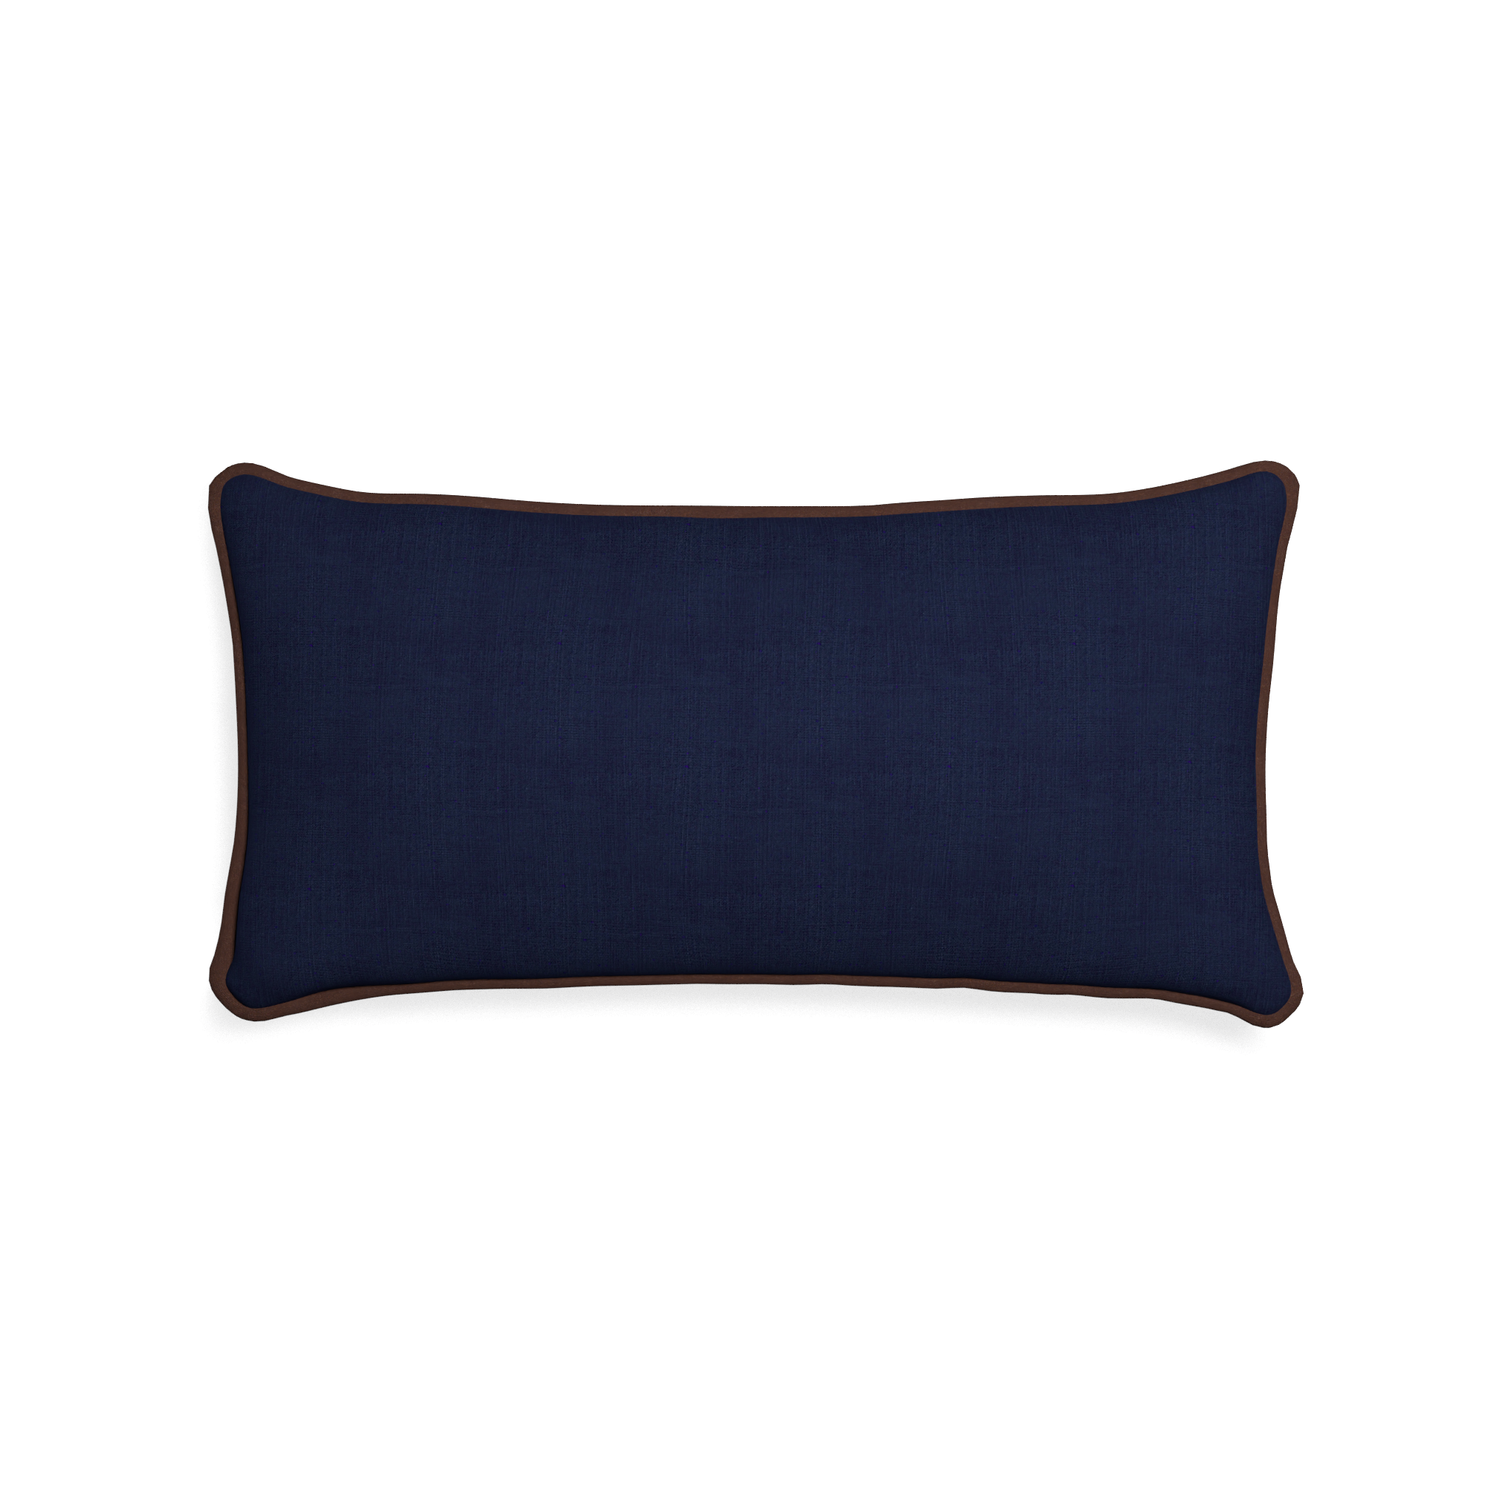 Midi-lumbar midnight custom navy bluepillow with w piping on white background